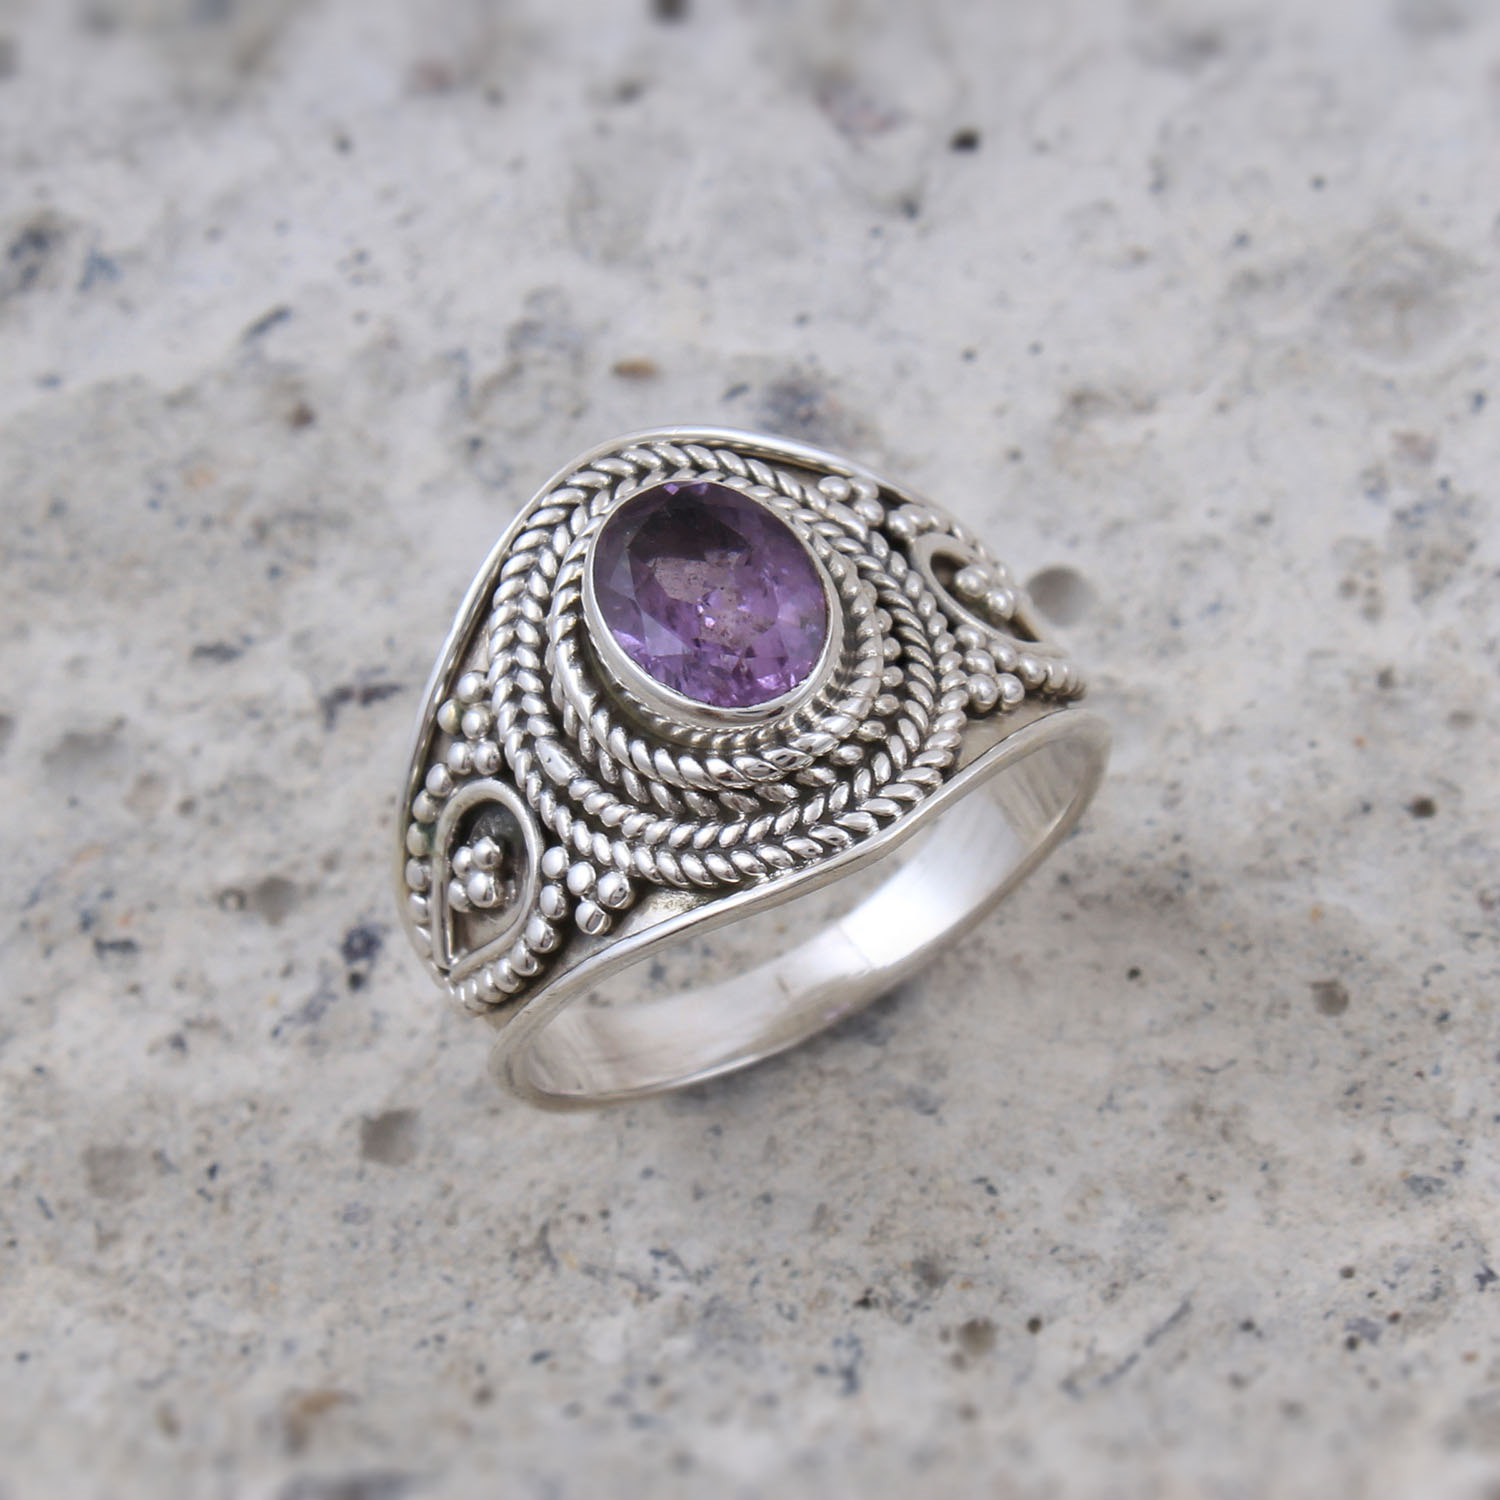 Pear Amethyst Gemstone 925 sterling Silver Jewelry 3 stone Ring Size US 7.5